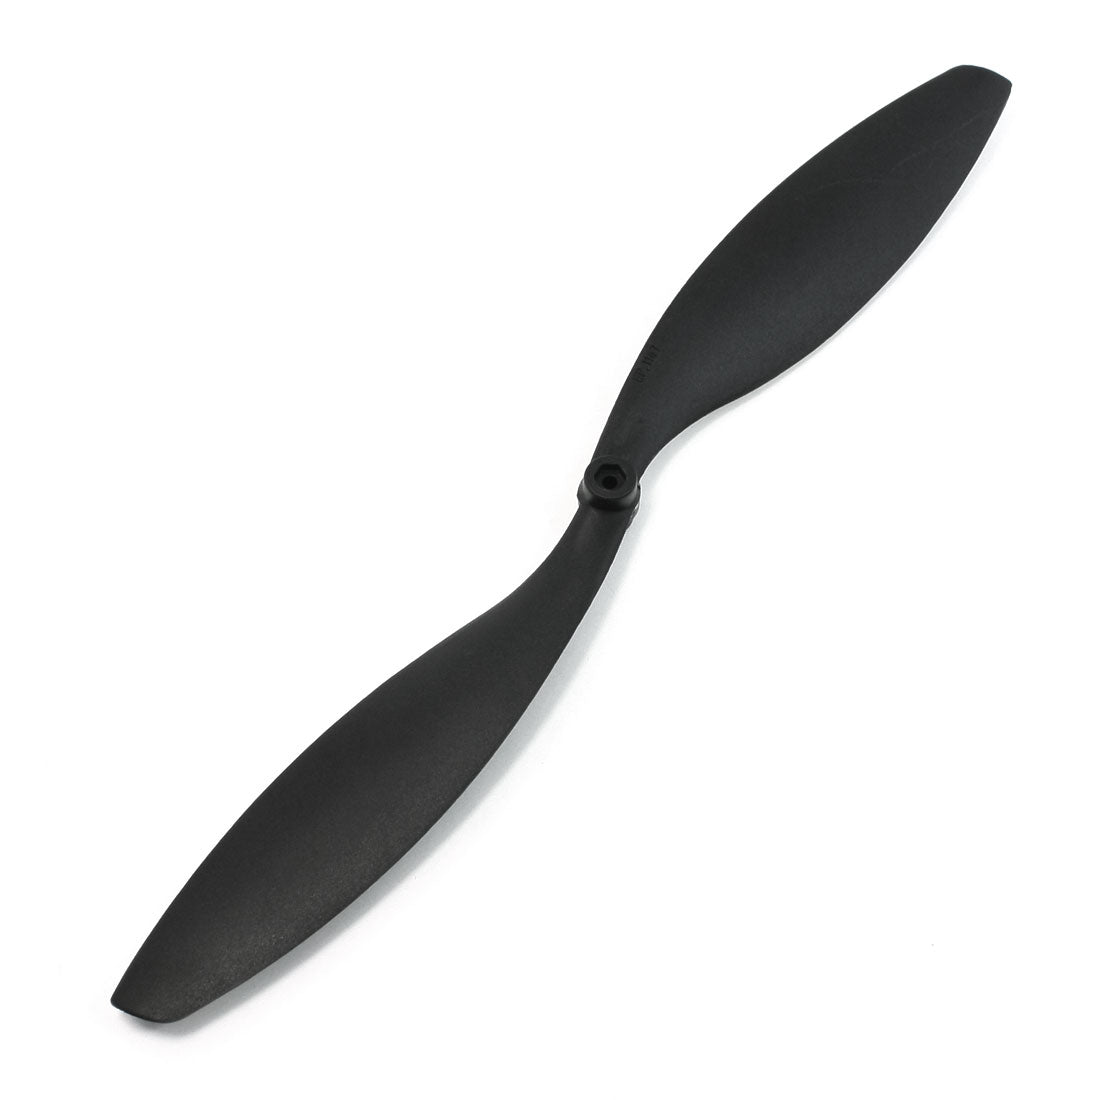 uxcell Uxcell Black Plastic Prop Propeller 1147 11x4.7 for Electric RC Plane Helicopter